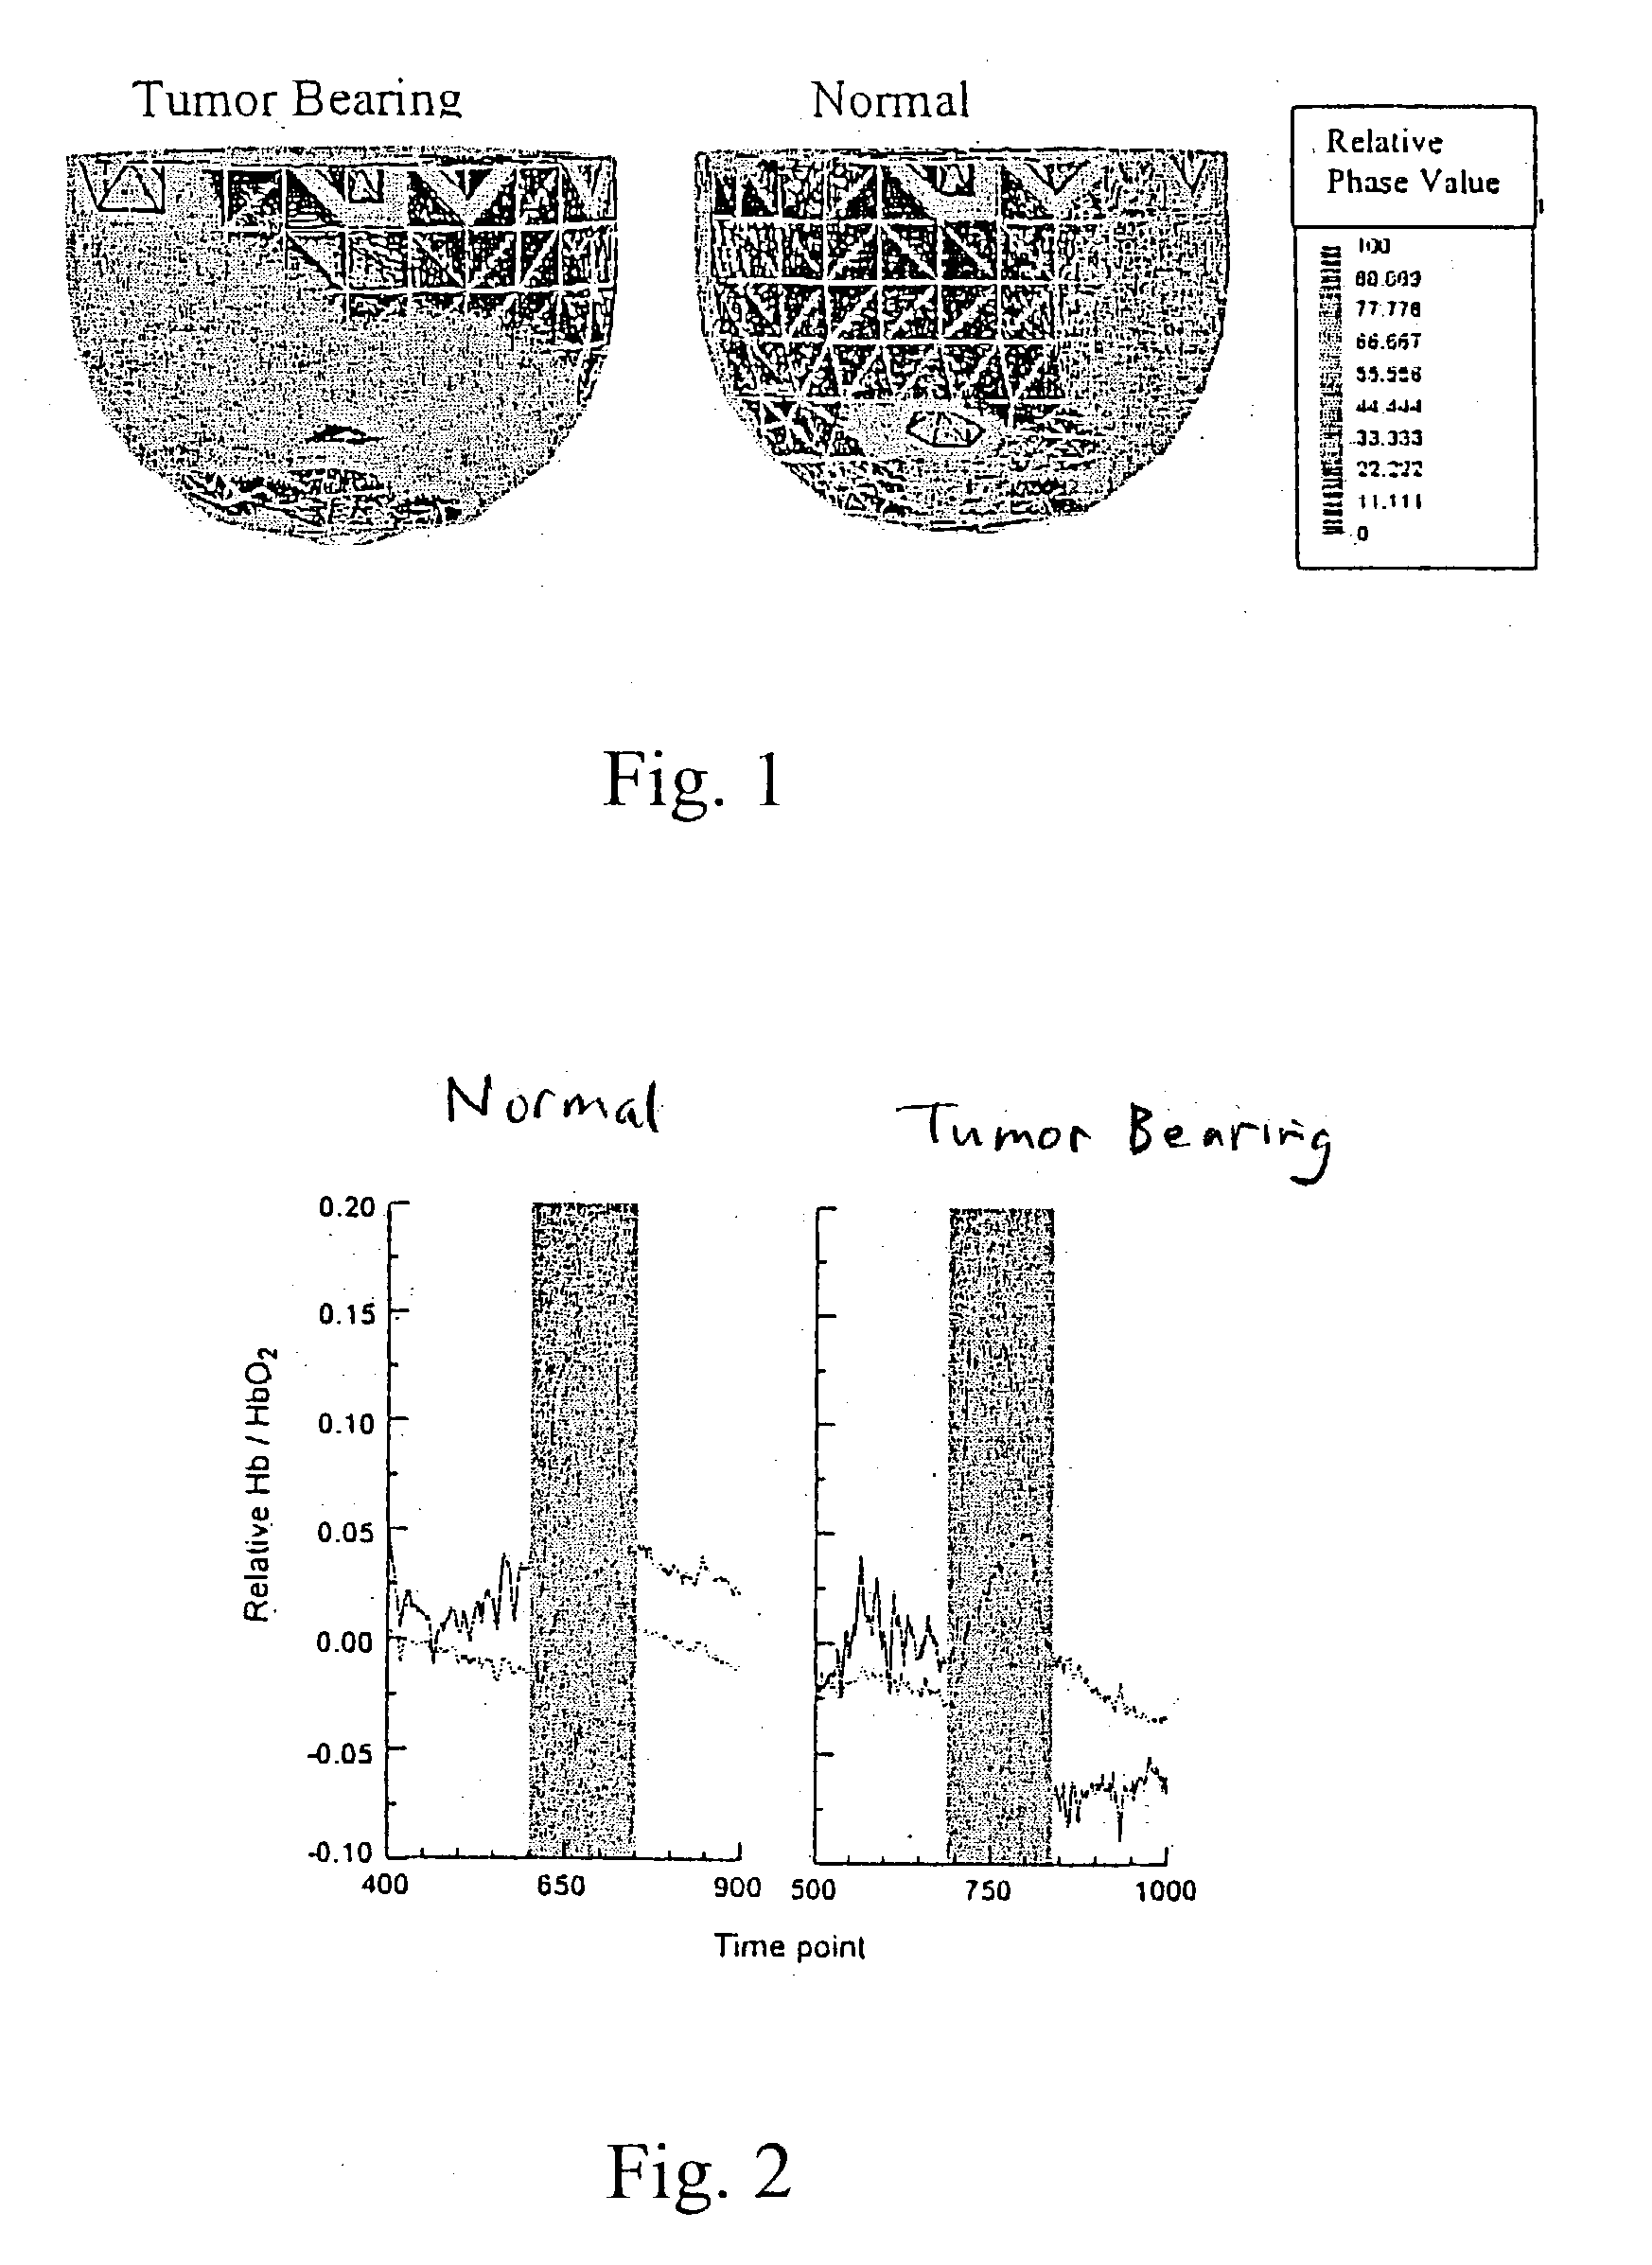 System and method for quantifying the dynamic response of a target system